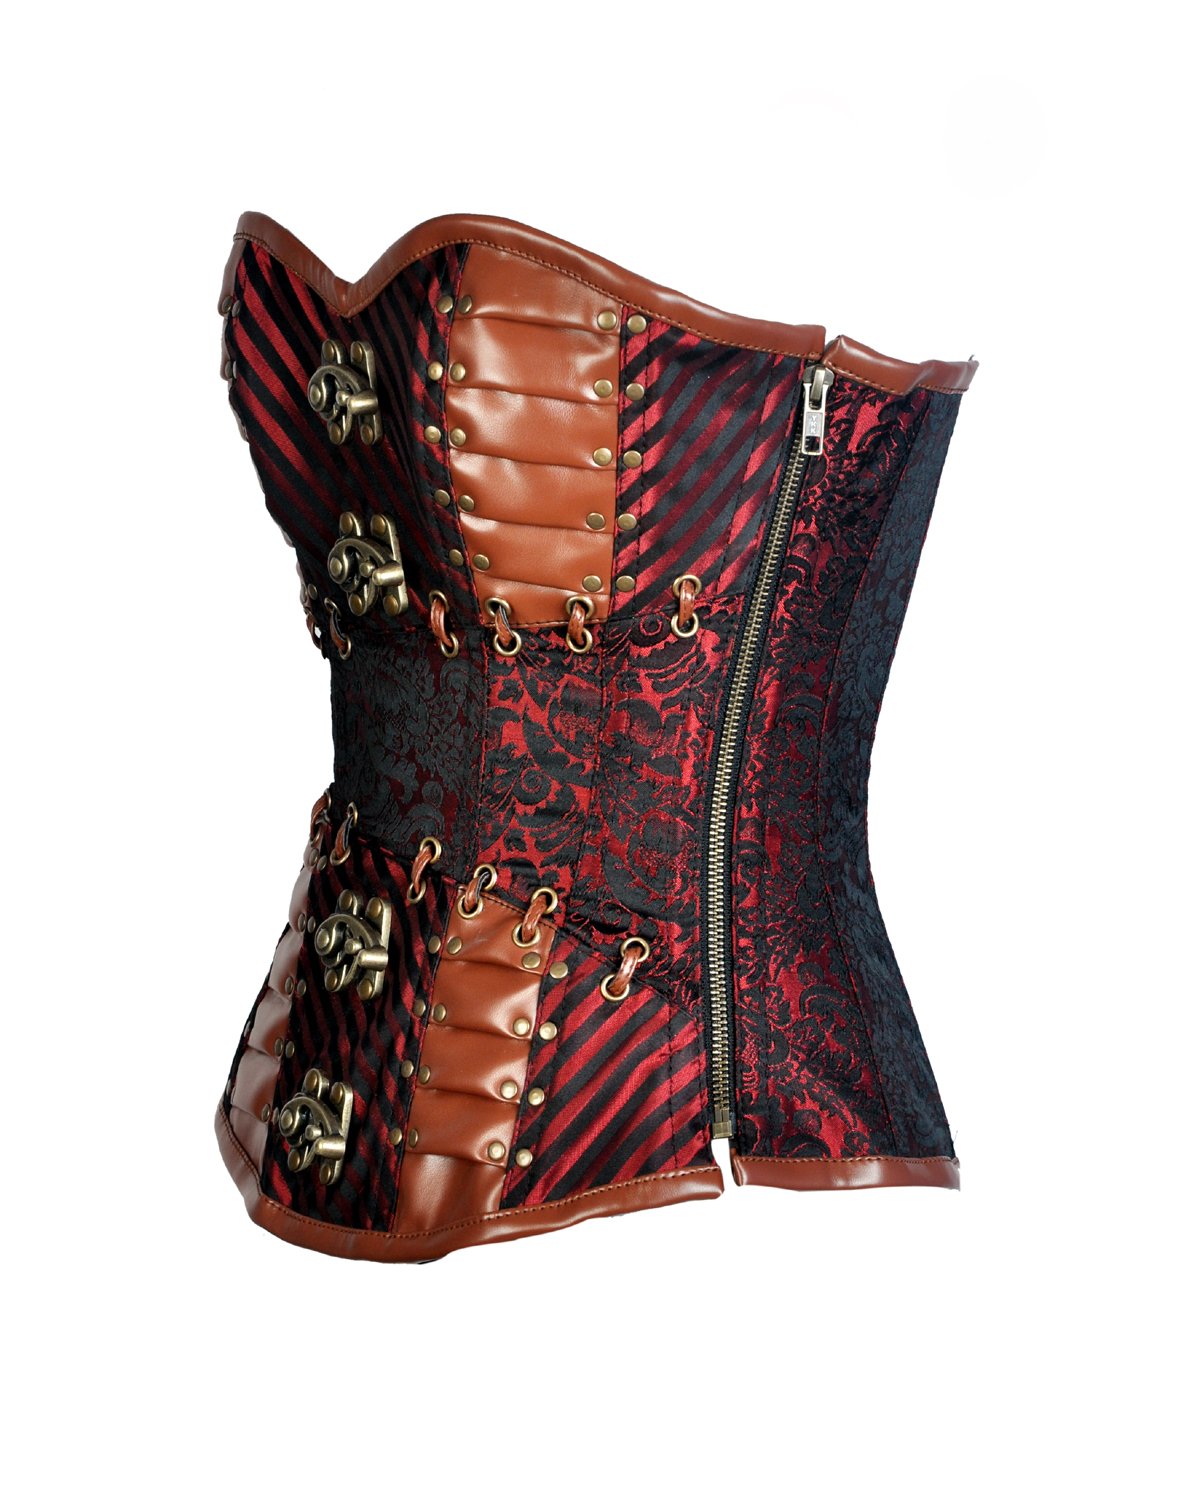 Loftus Red Brocade & Faux Leather Gothic Corset